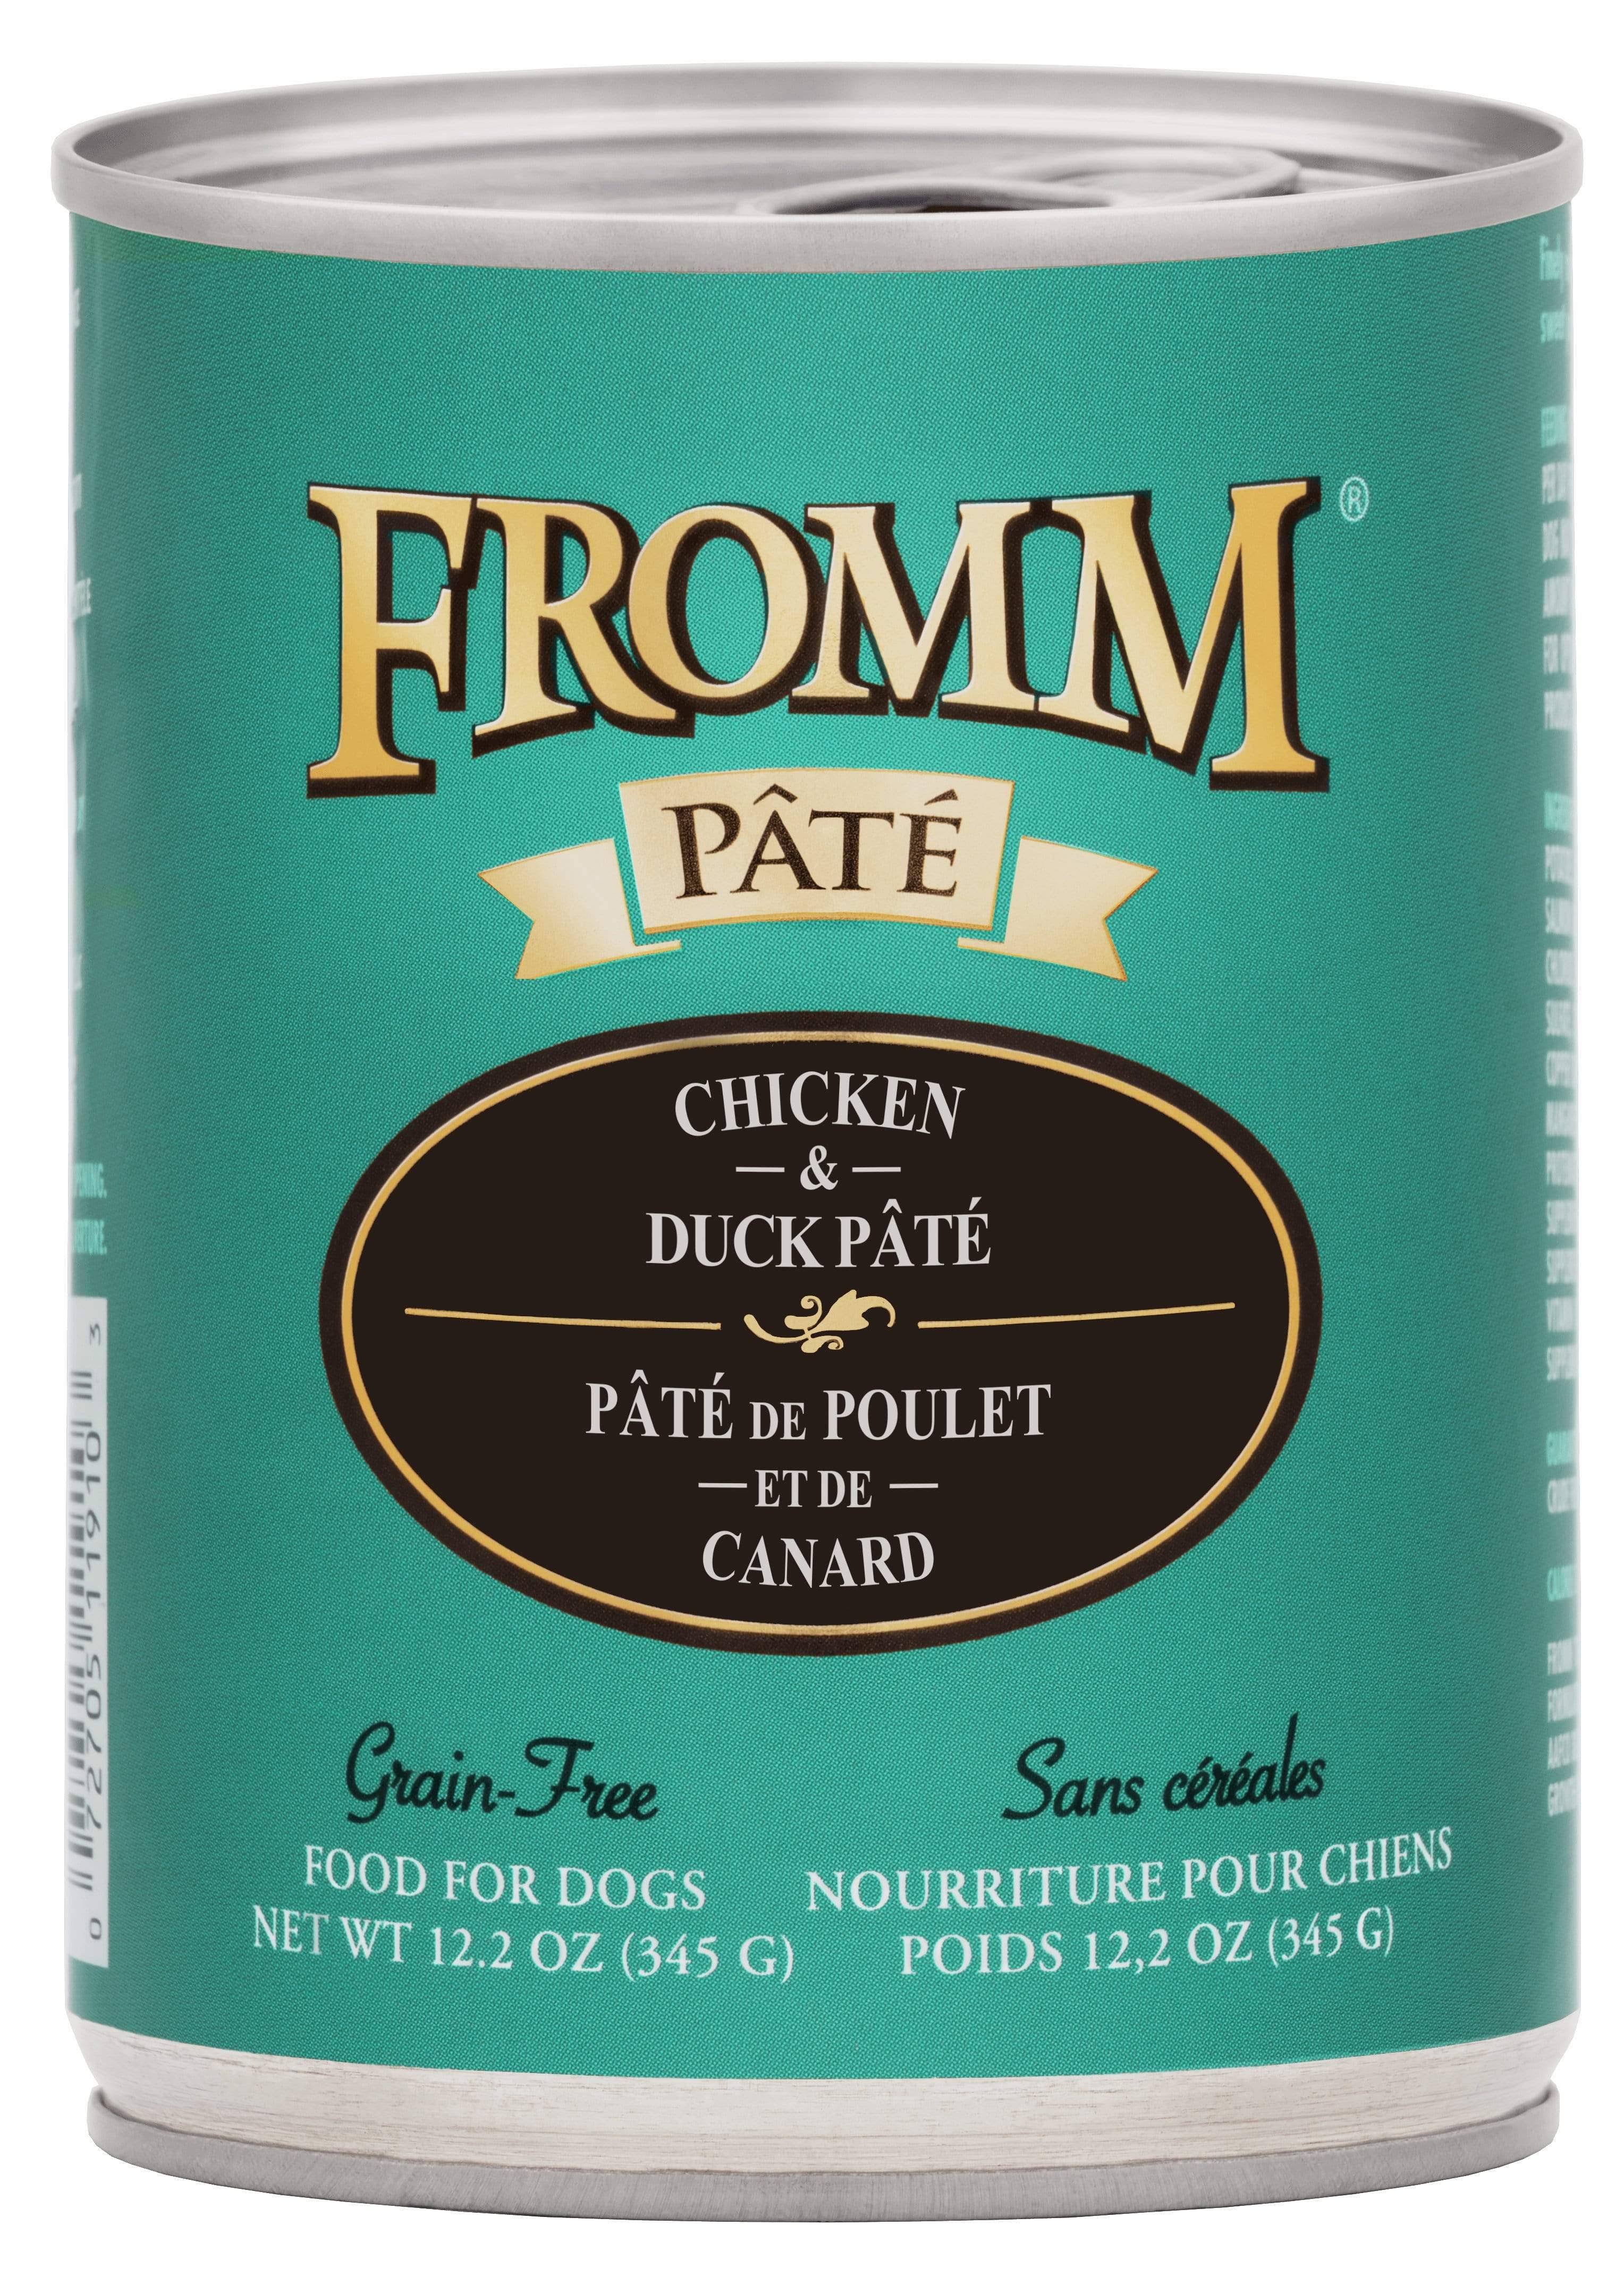 Fromm Gold Chicken & Duck Pate Grain-Free Canned Dog Food